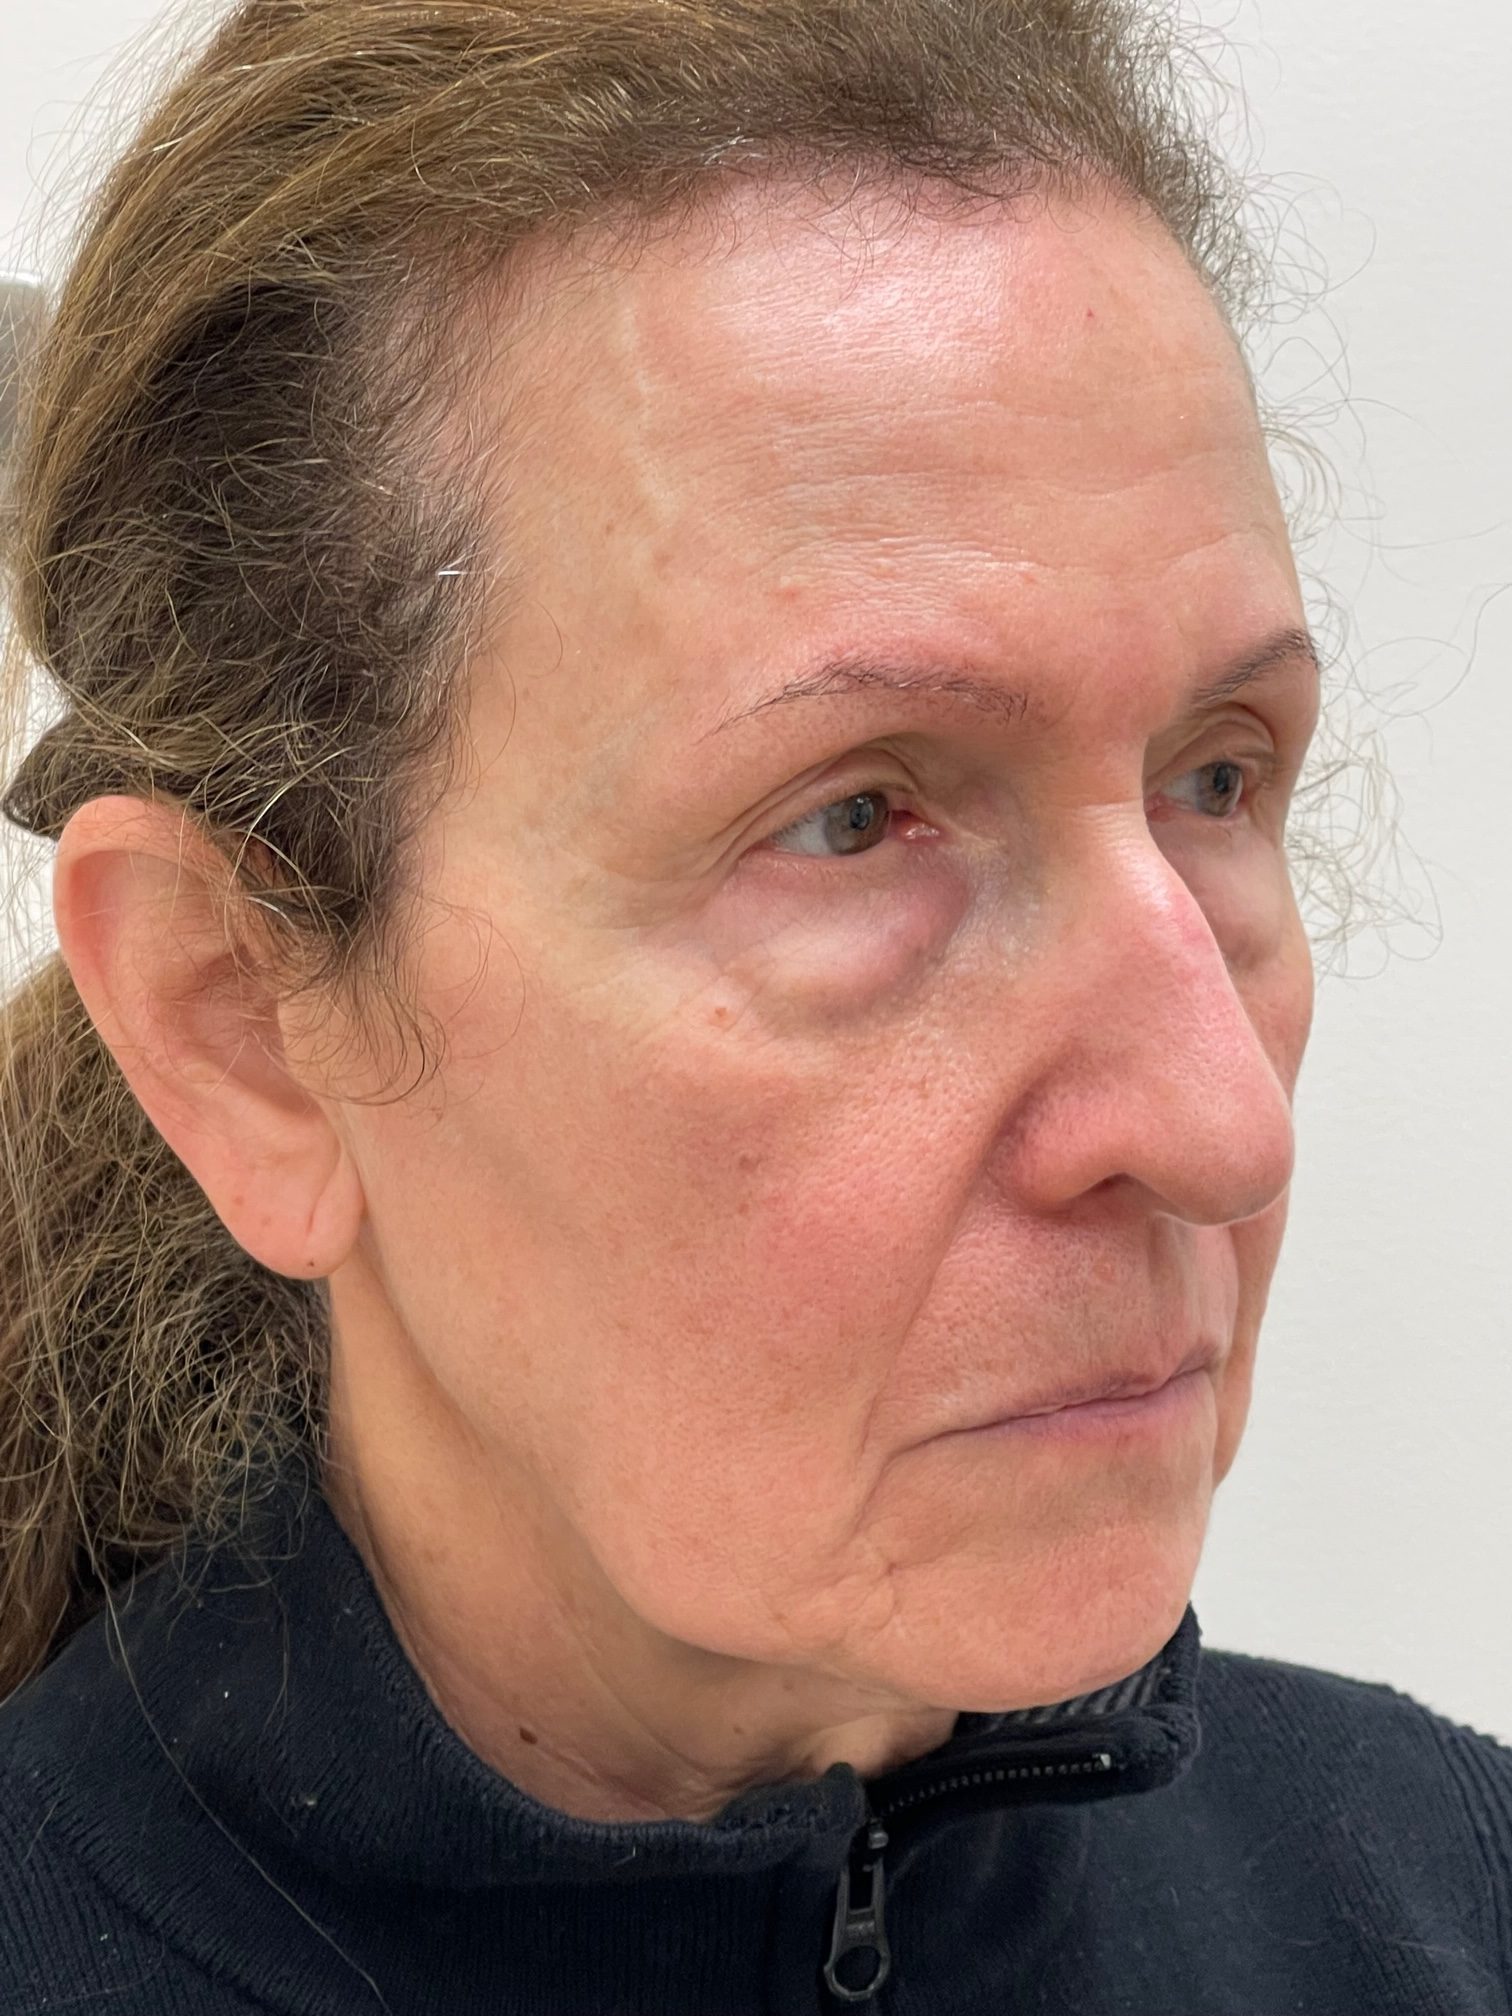 Photo of the patient’s face before the Blepharoplasty surgery. Patient 4 - Set 3